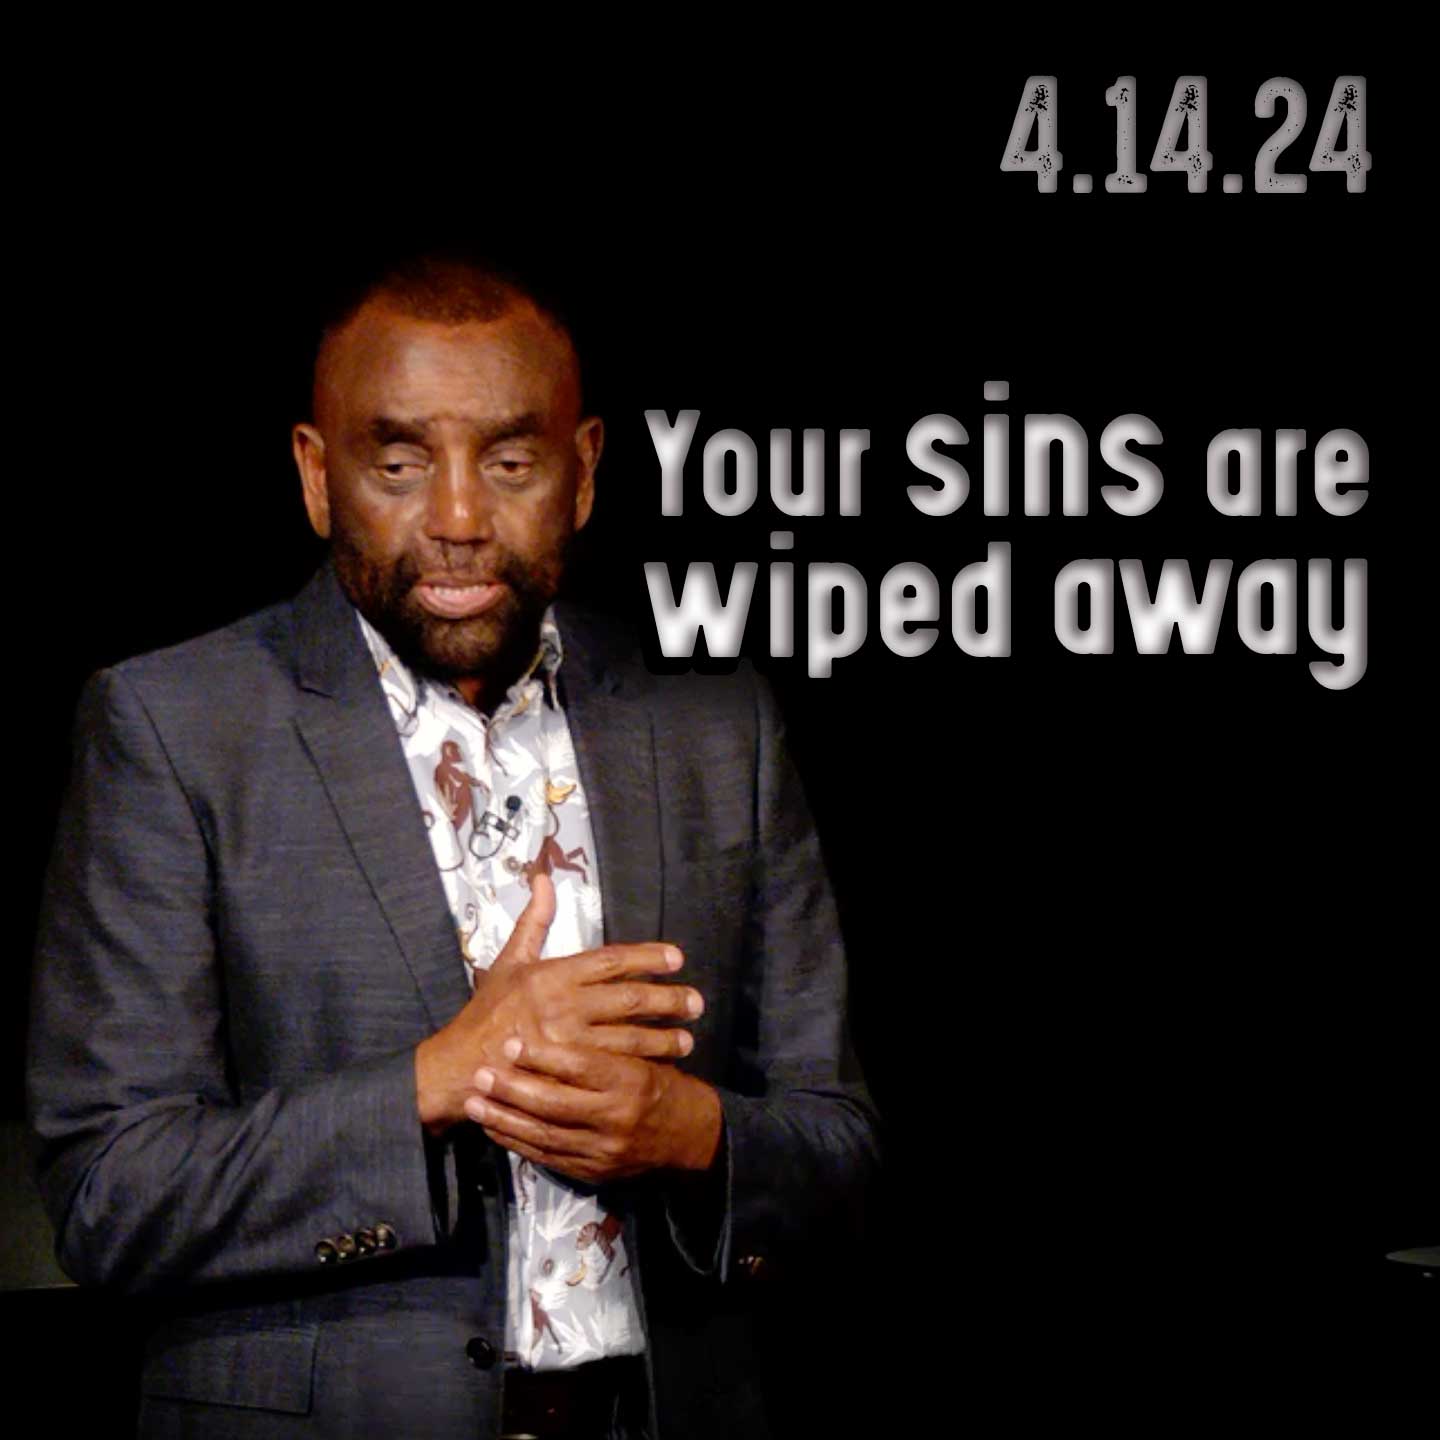 Why do you call yourself a sinner? Church 4/14/24